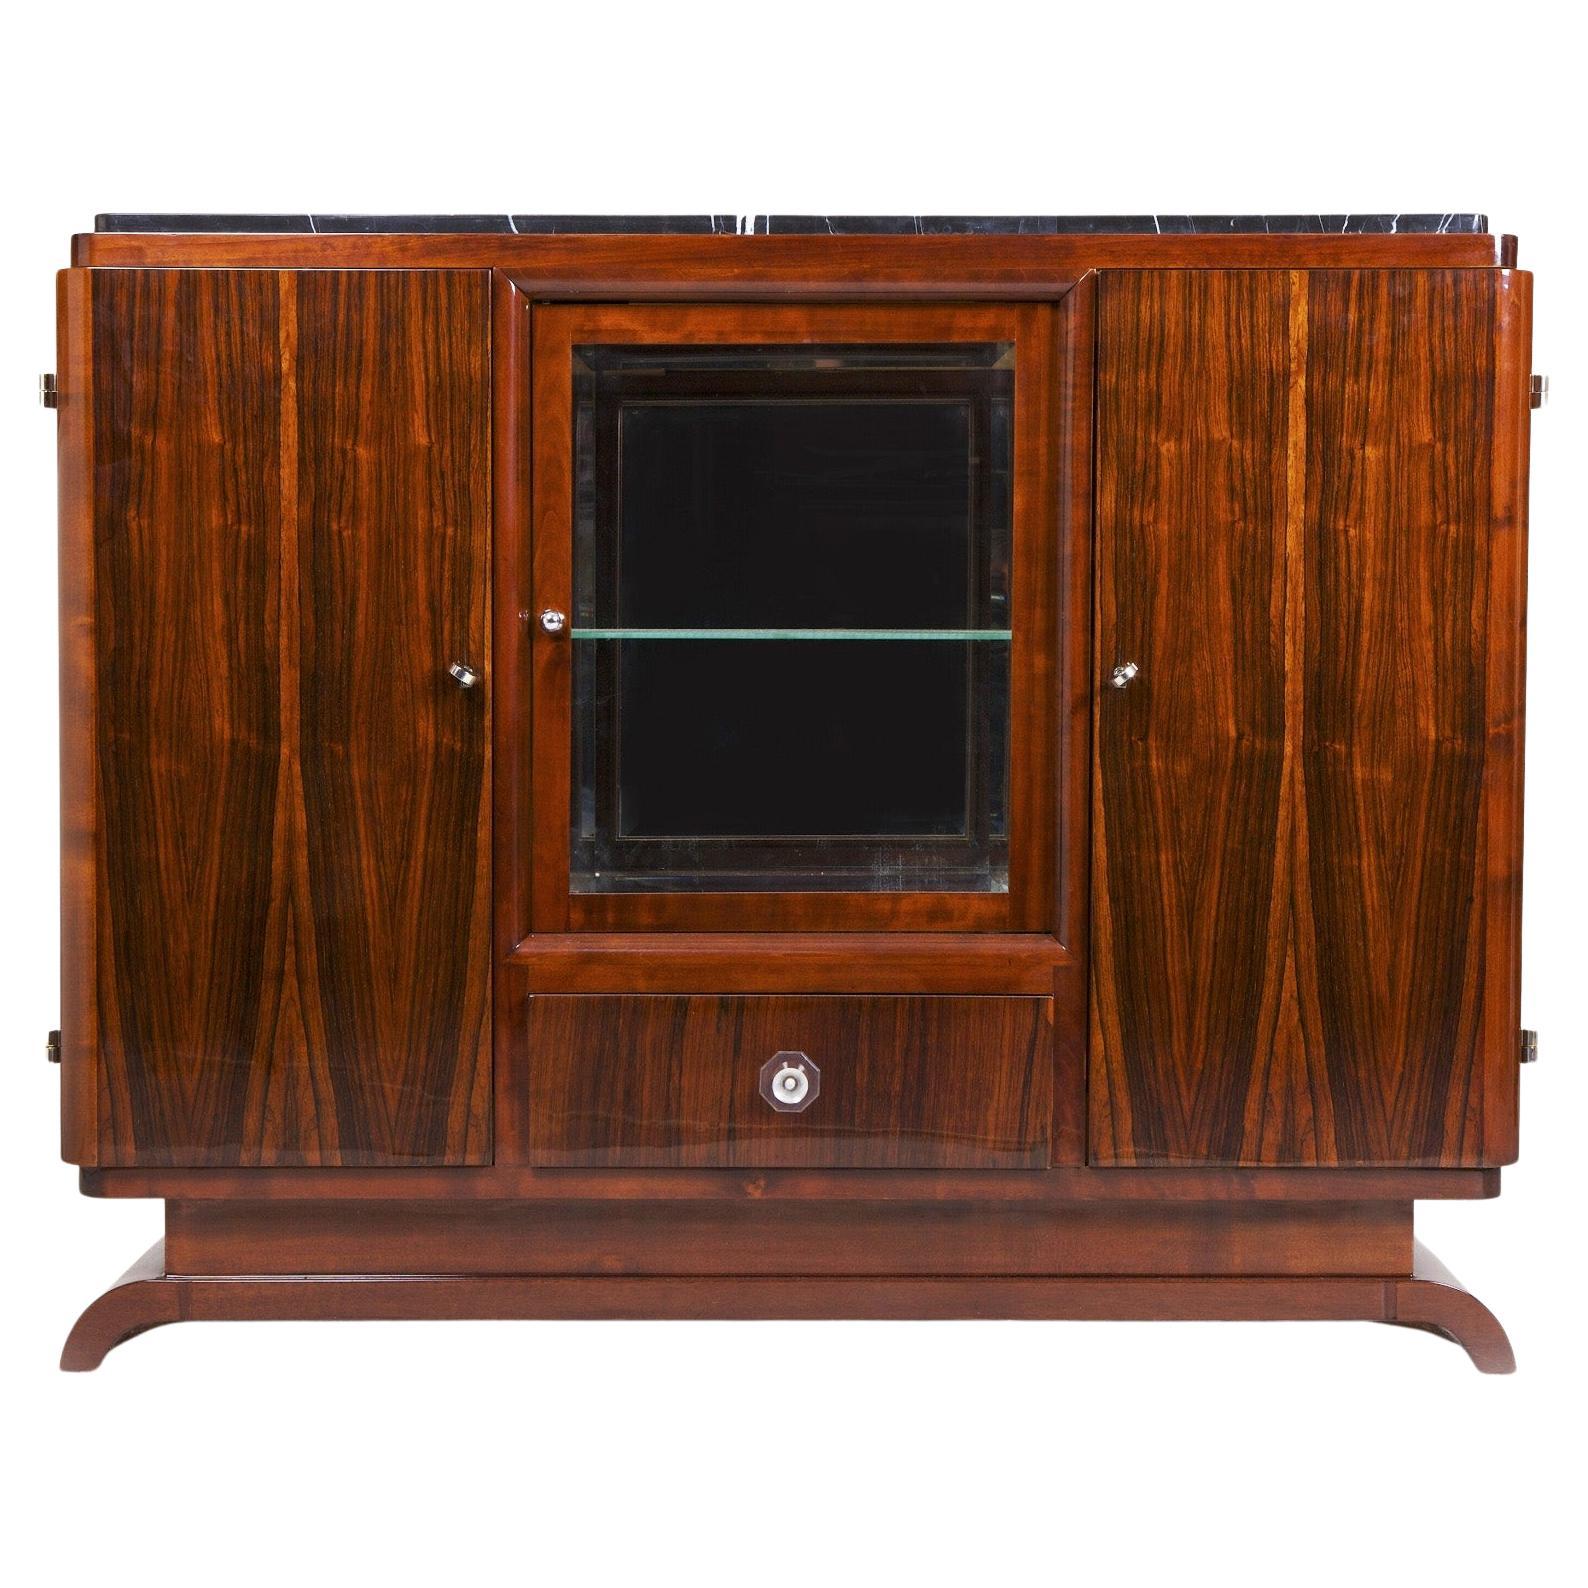 French Art Deco Sideboard with Marble Desk, 1930-1939, Palisander, Restored For Sale